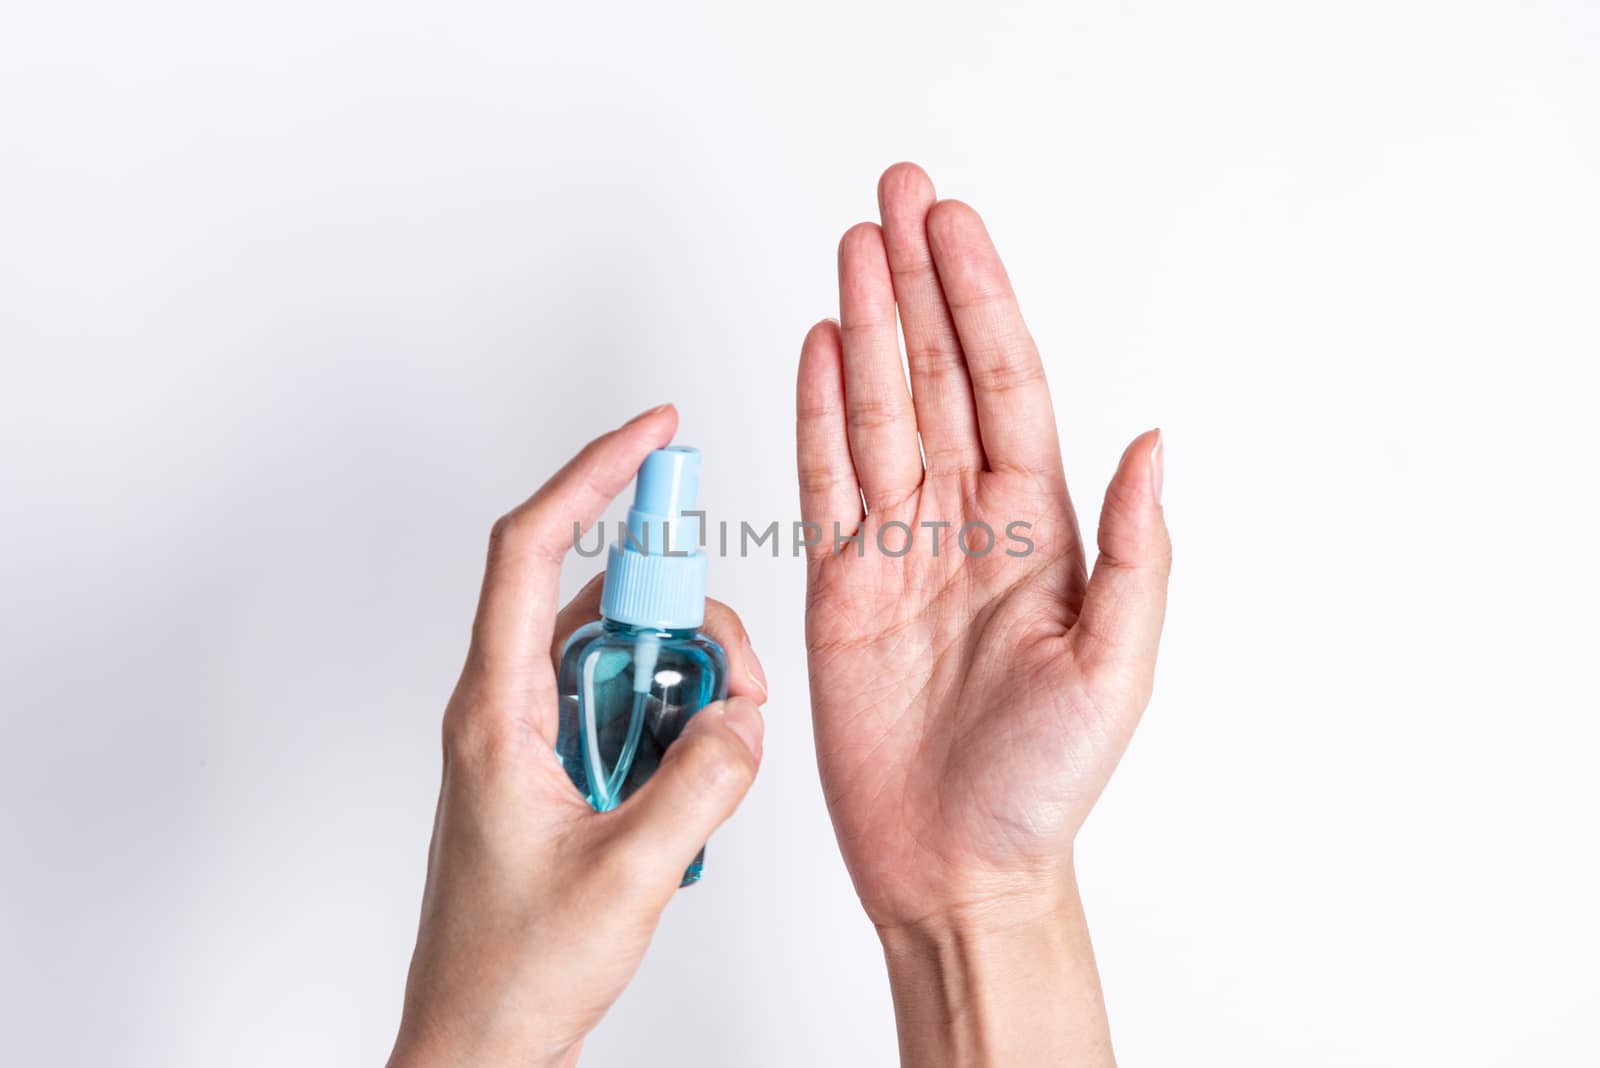 The Asian girl has cleaning hand by hand cleaner gel to protect COVID-19 with isolated on white background concept.